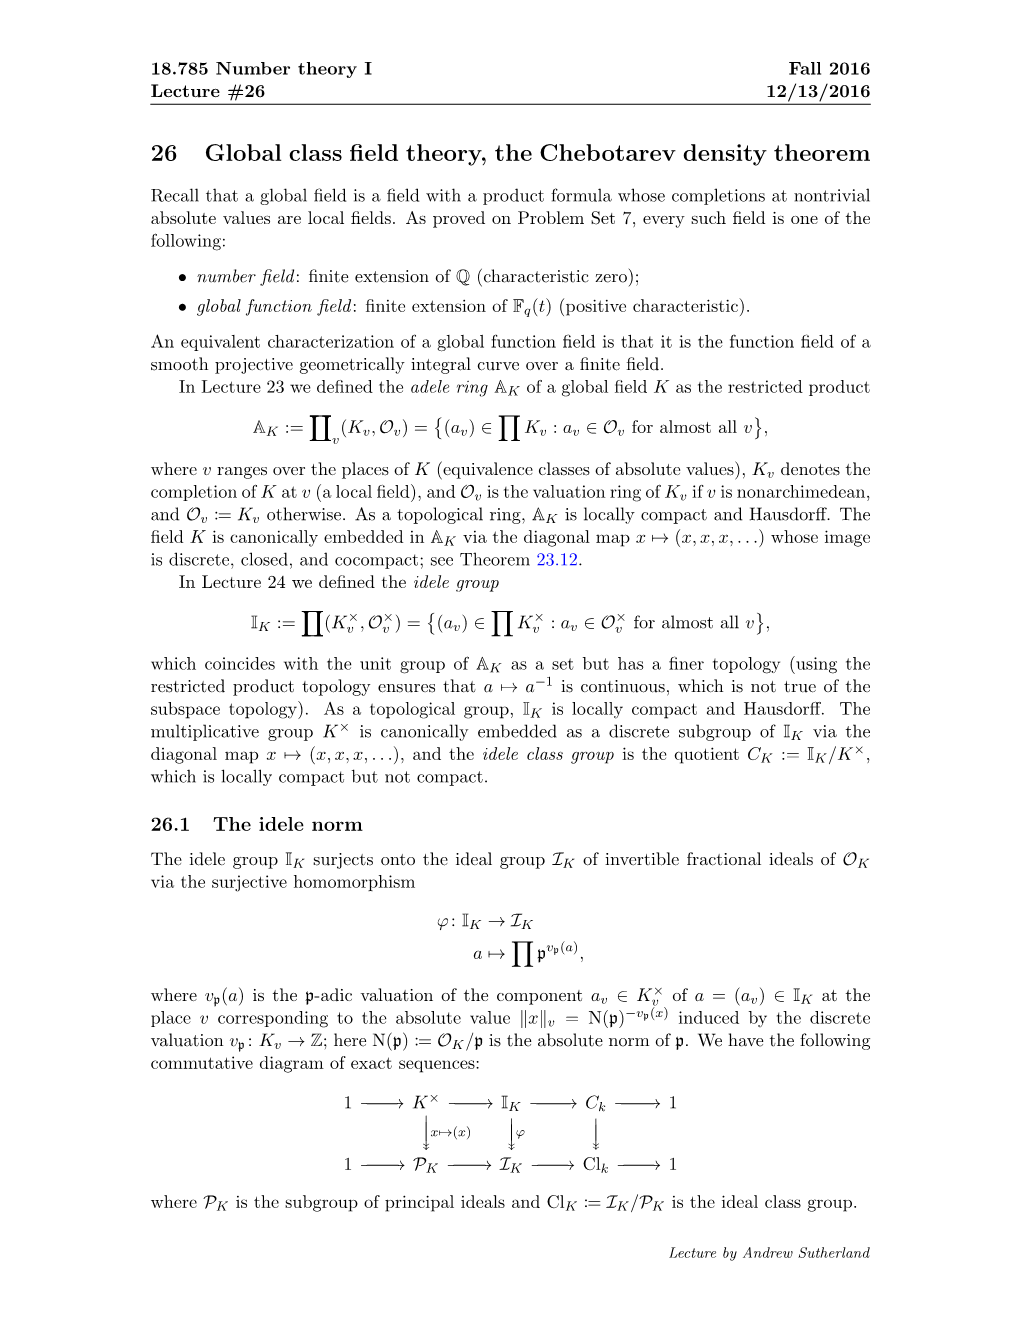 26 Global Class Field Theory, the Chebotarev Density Theorem